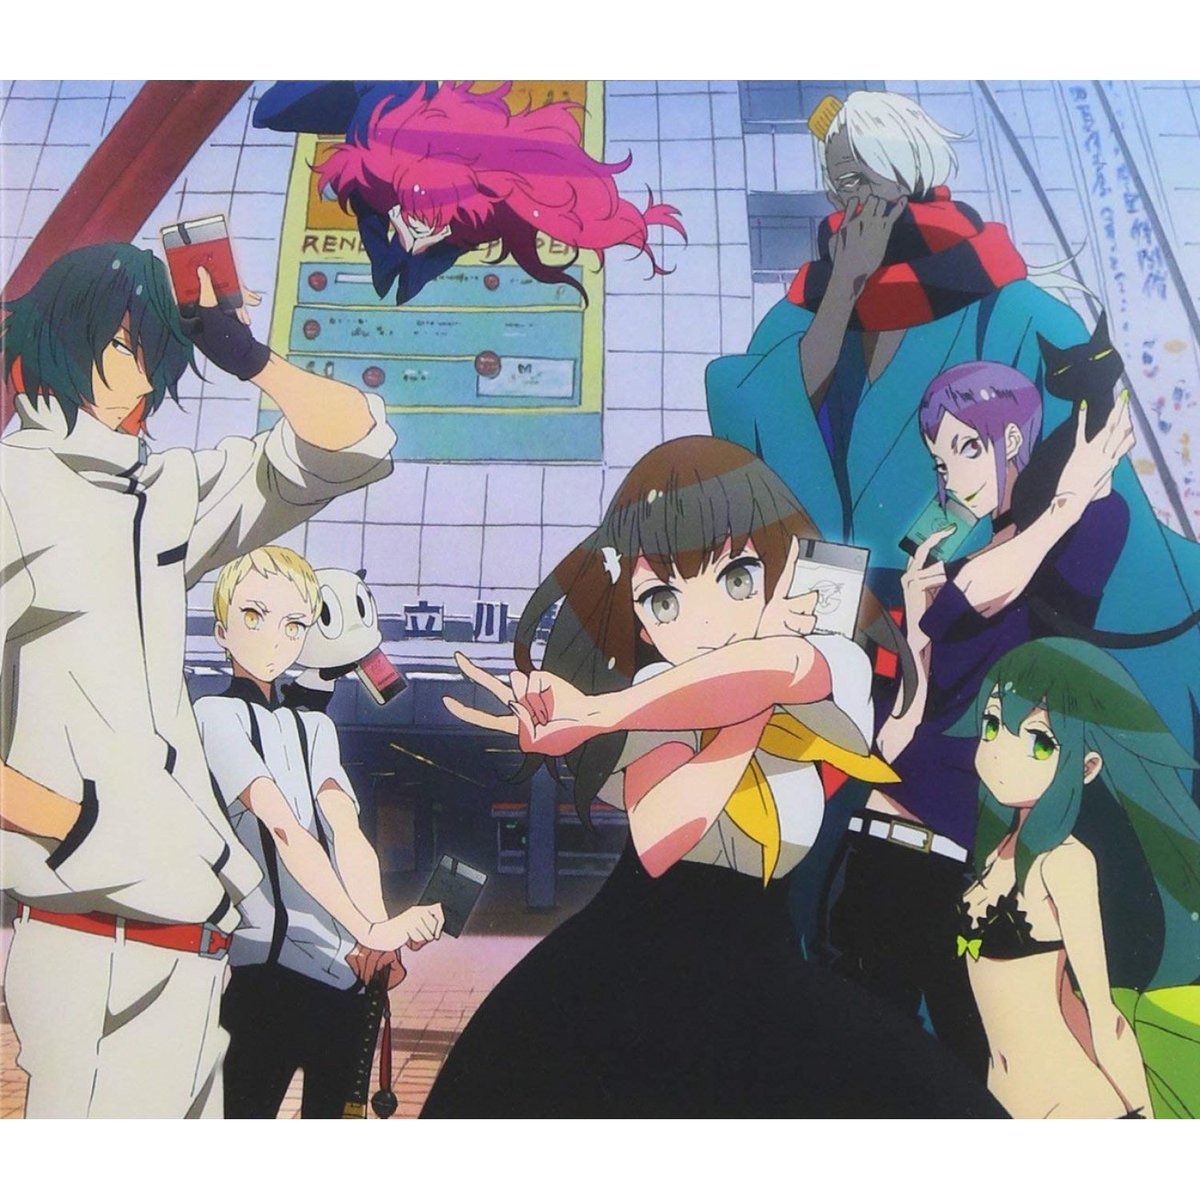 Gatchaman Crowds Original Soundtrack — Taku Iwasaki et al.He just has so many crazy innovative compositions. Love the modern Gatchaman sound he came up with. "Tutu" is an amazingly non-intrusive bgm song and "in the name of love" is just epic and groovy amongst others.